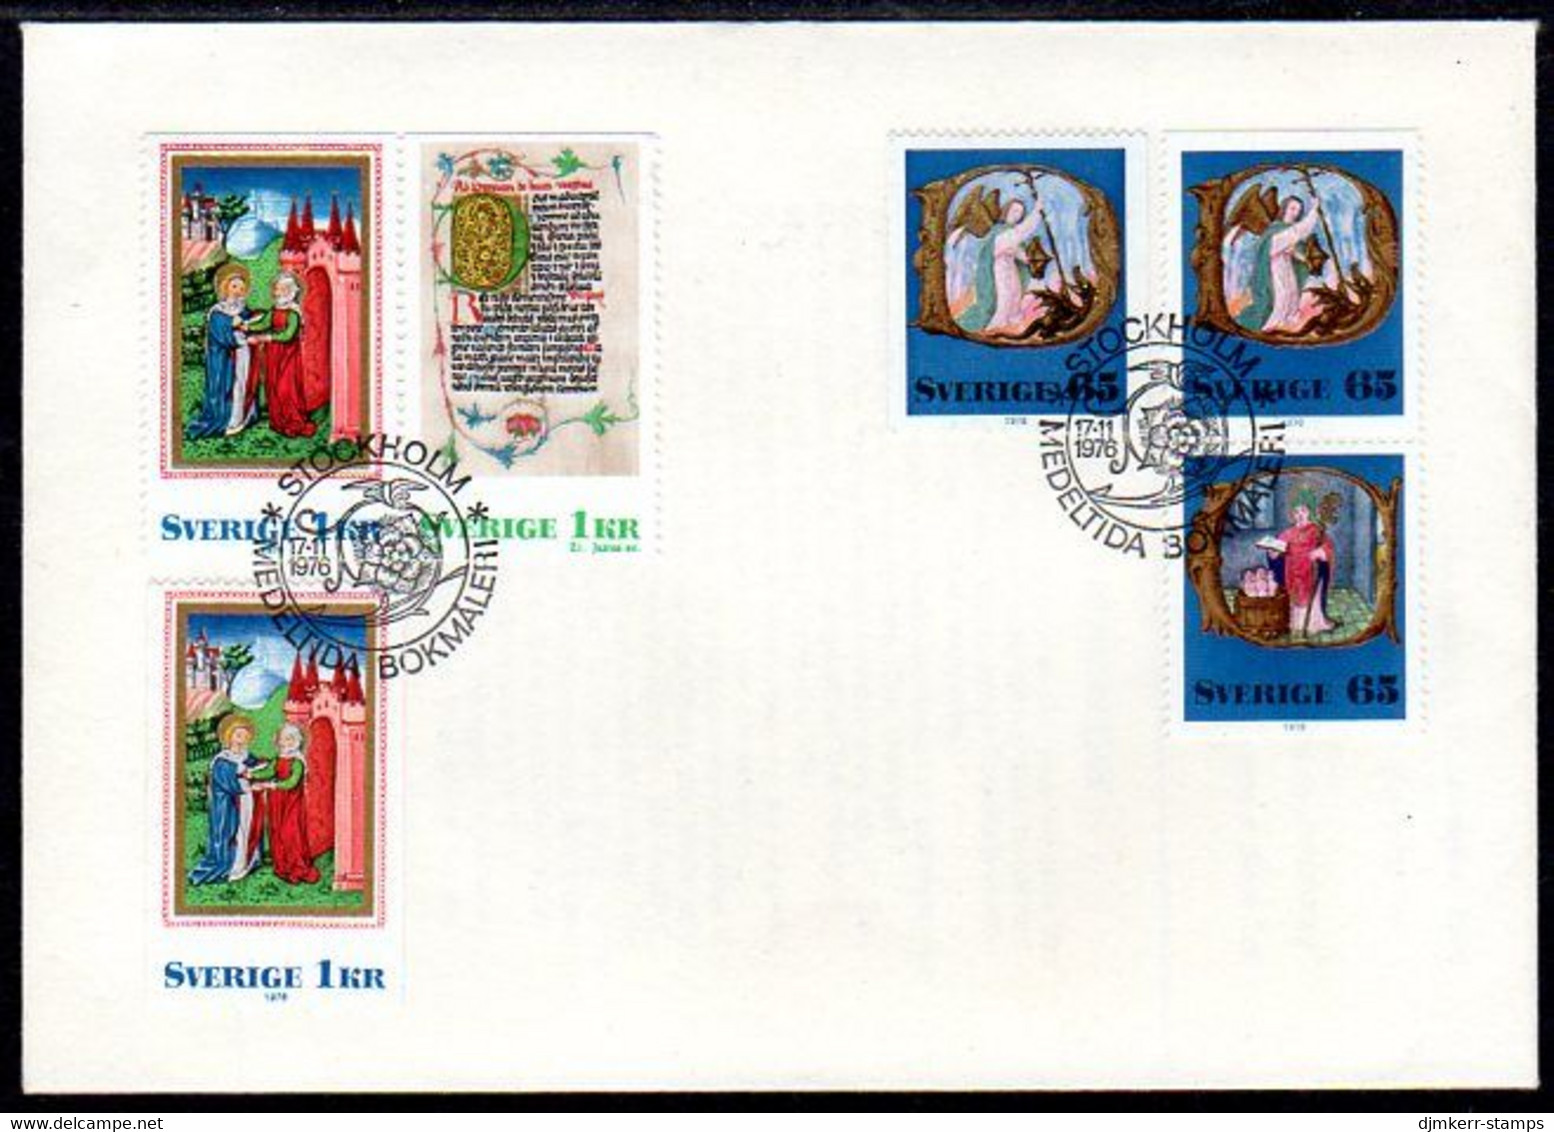 SWEDEN 1976 Christmas FDC.  Michel 966-69 - FDC